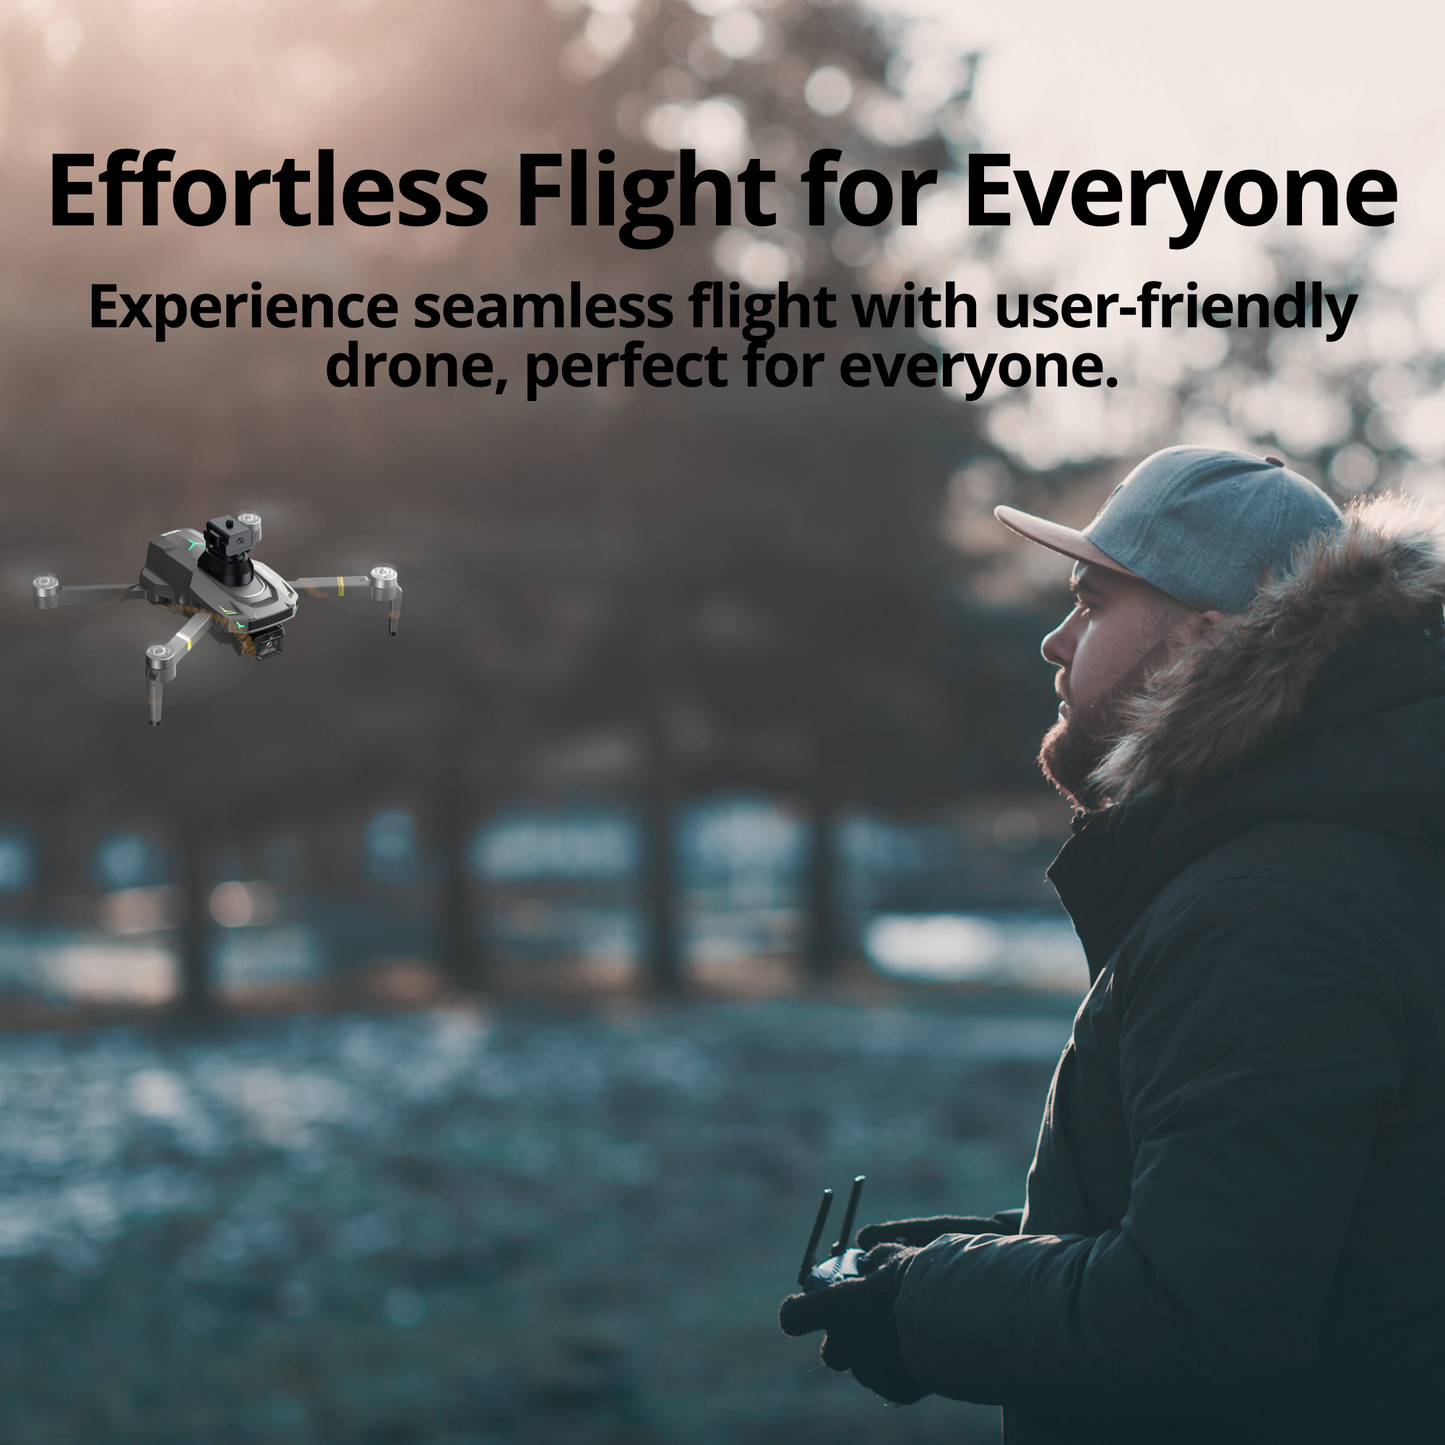 The Bigly Brothers E58 X Lite Mark II Delta Black Superior Edition, FPV Drone with Camera, 360 Degrees of Obstacle Avoidance, Carrying Case plus an additional 2000mAh Battery, Below 249g, Ready to Fly!